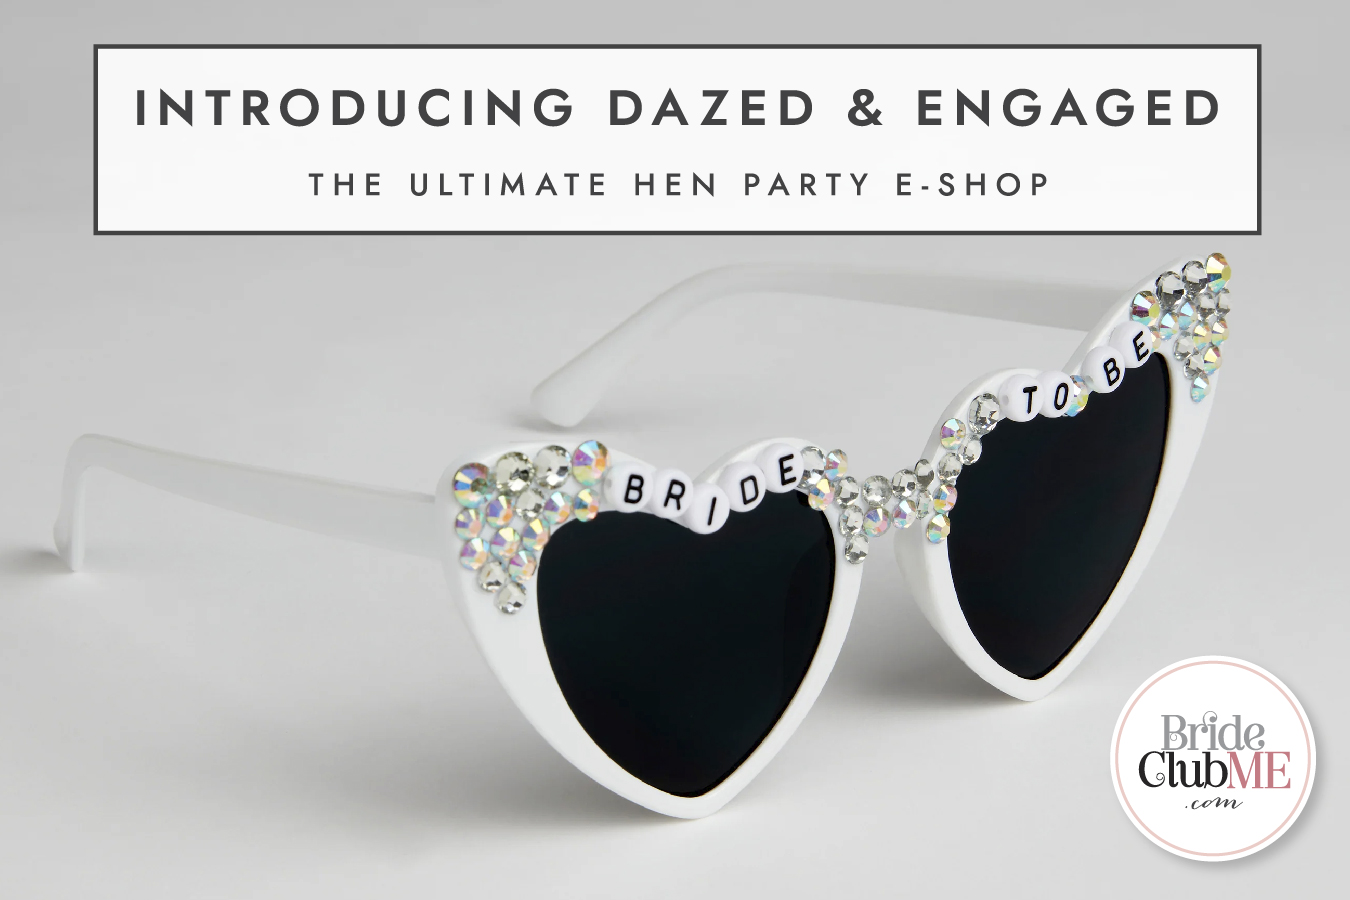 BCME-Introducing Dazed & Engaged_Article First Image